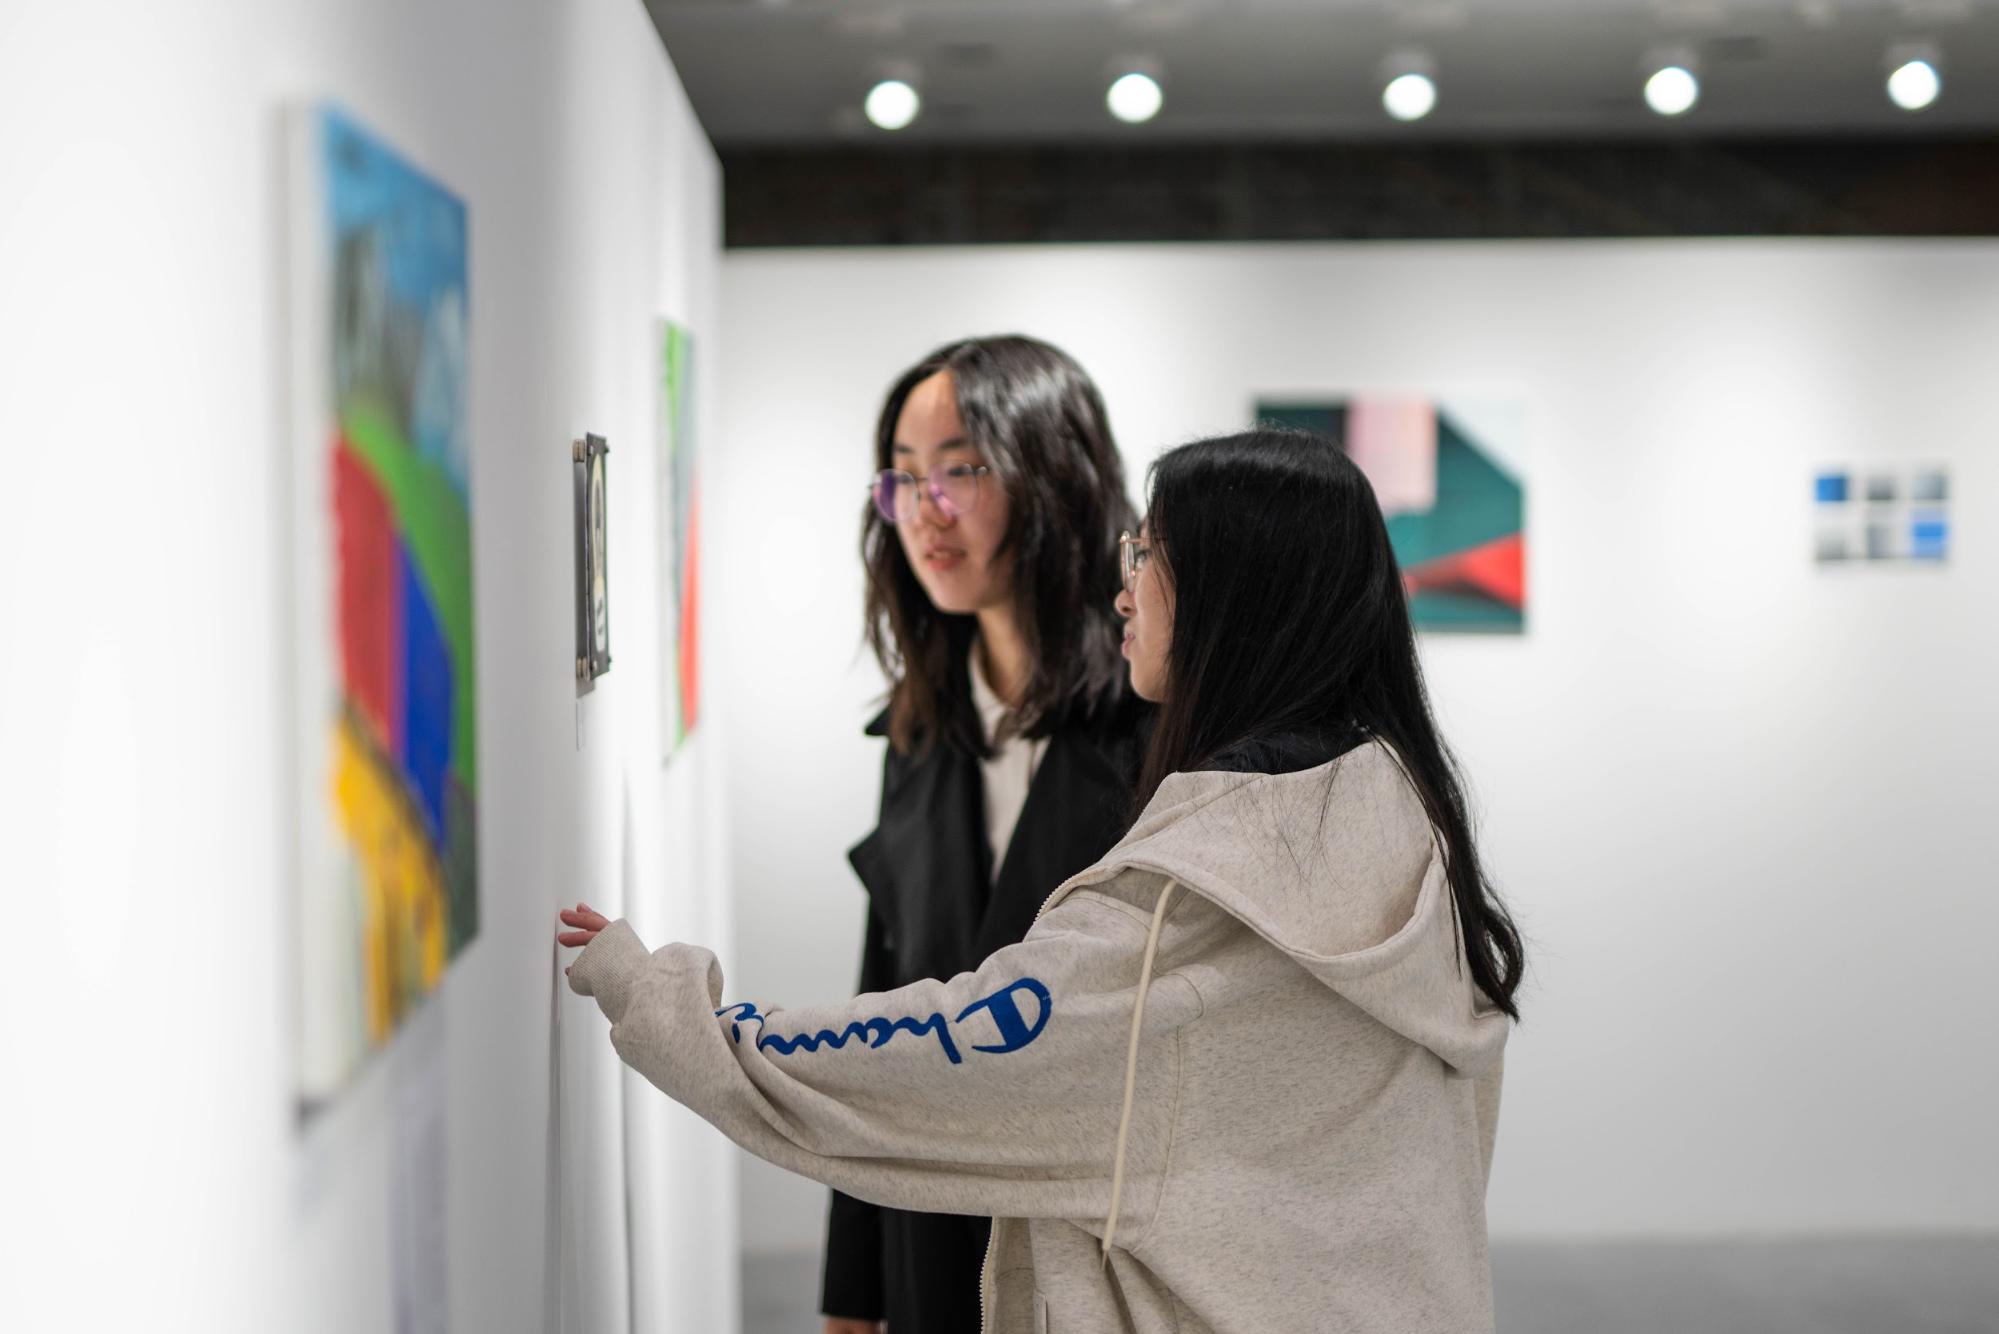 Two students stare closely at a painting in a gallery